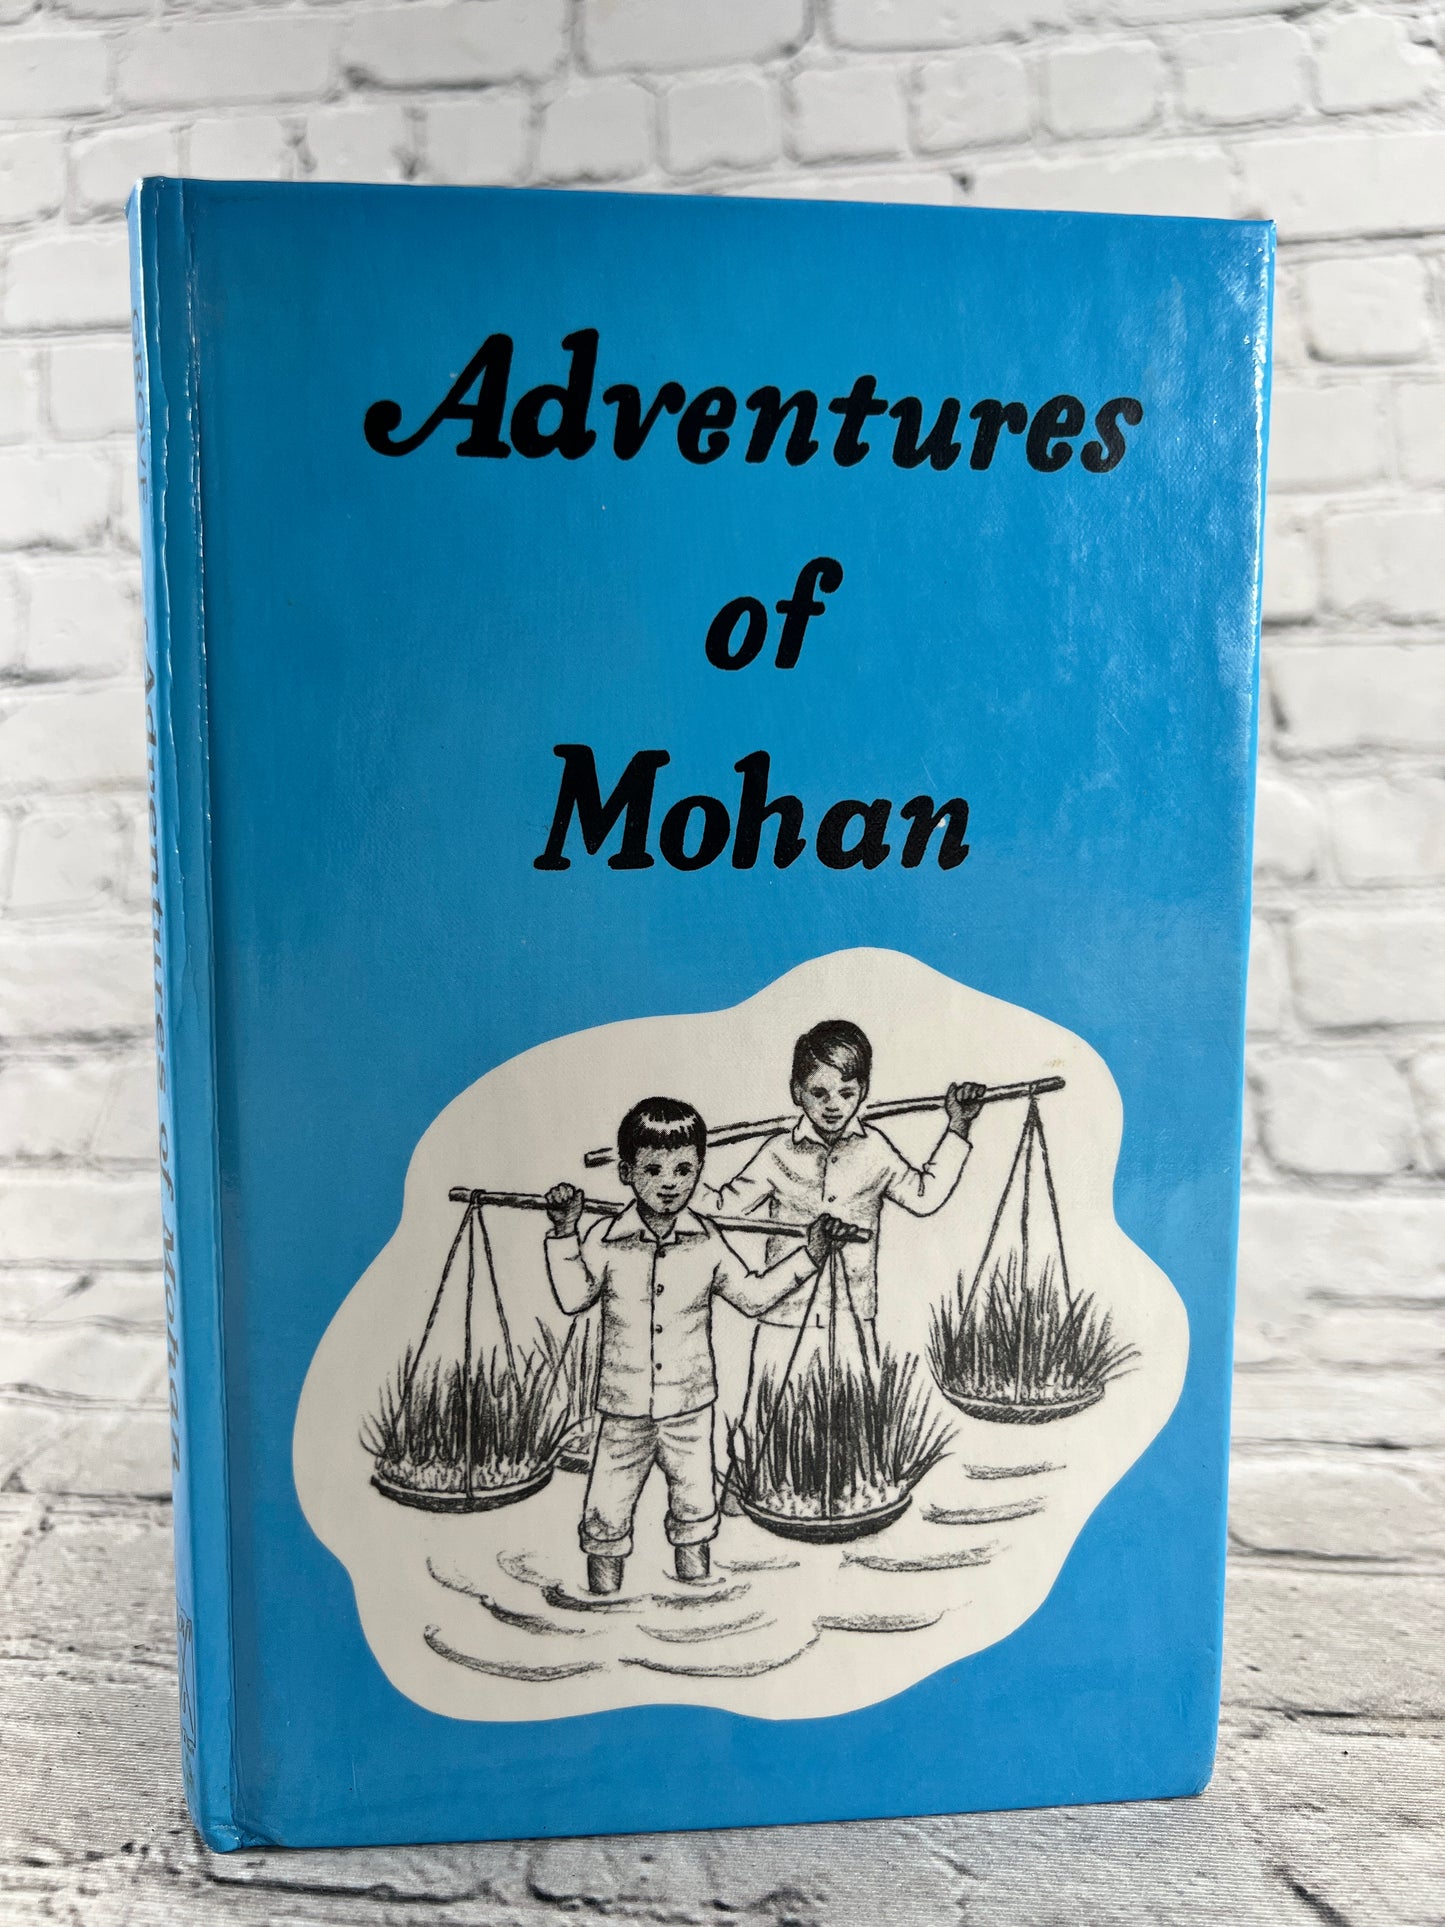 Adventures of Mohan by Ella Grove [1990 • 1st Edition]